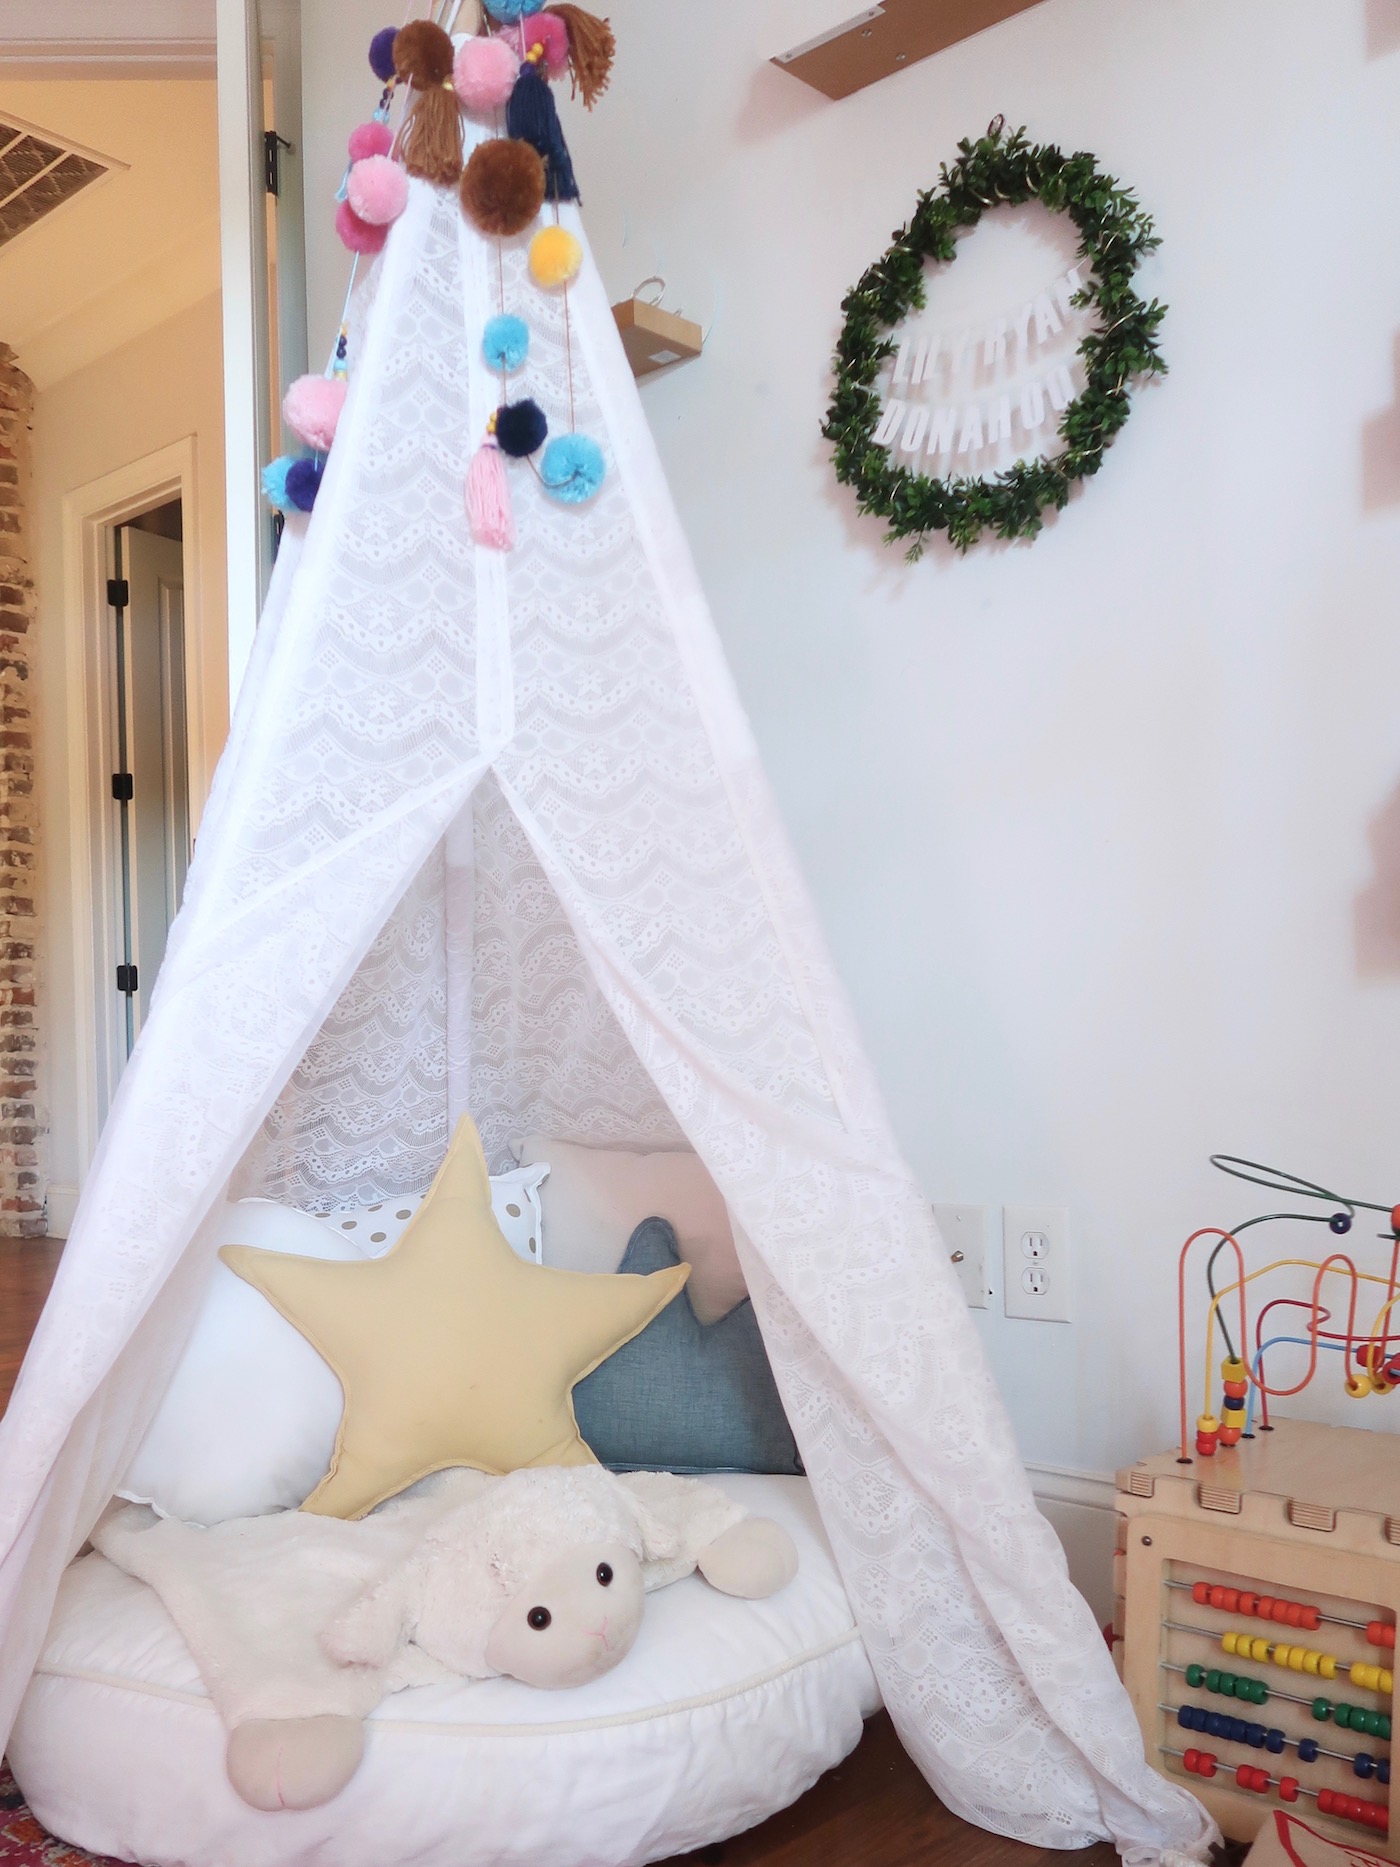 Teepee Joy: Handmade teepees and accessories for boys and girls // www.thehiveblog.com